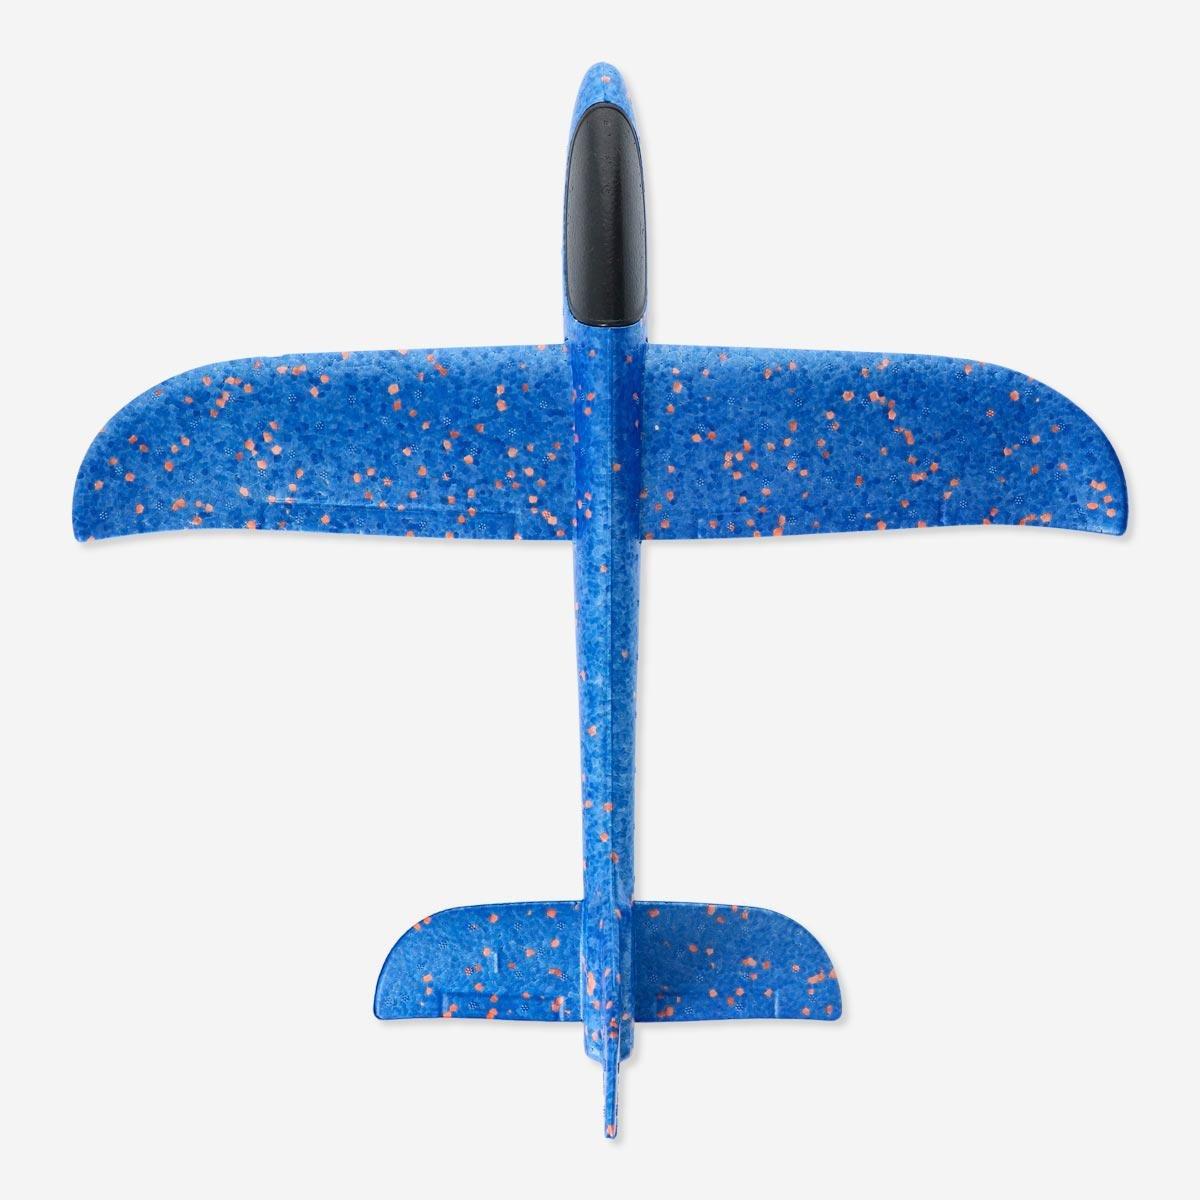 Blue build-your-own airplane